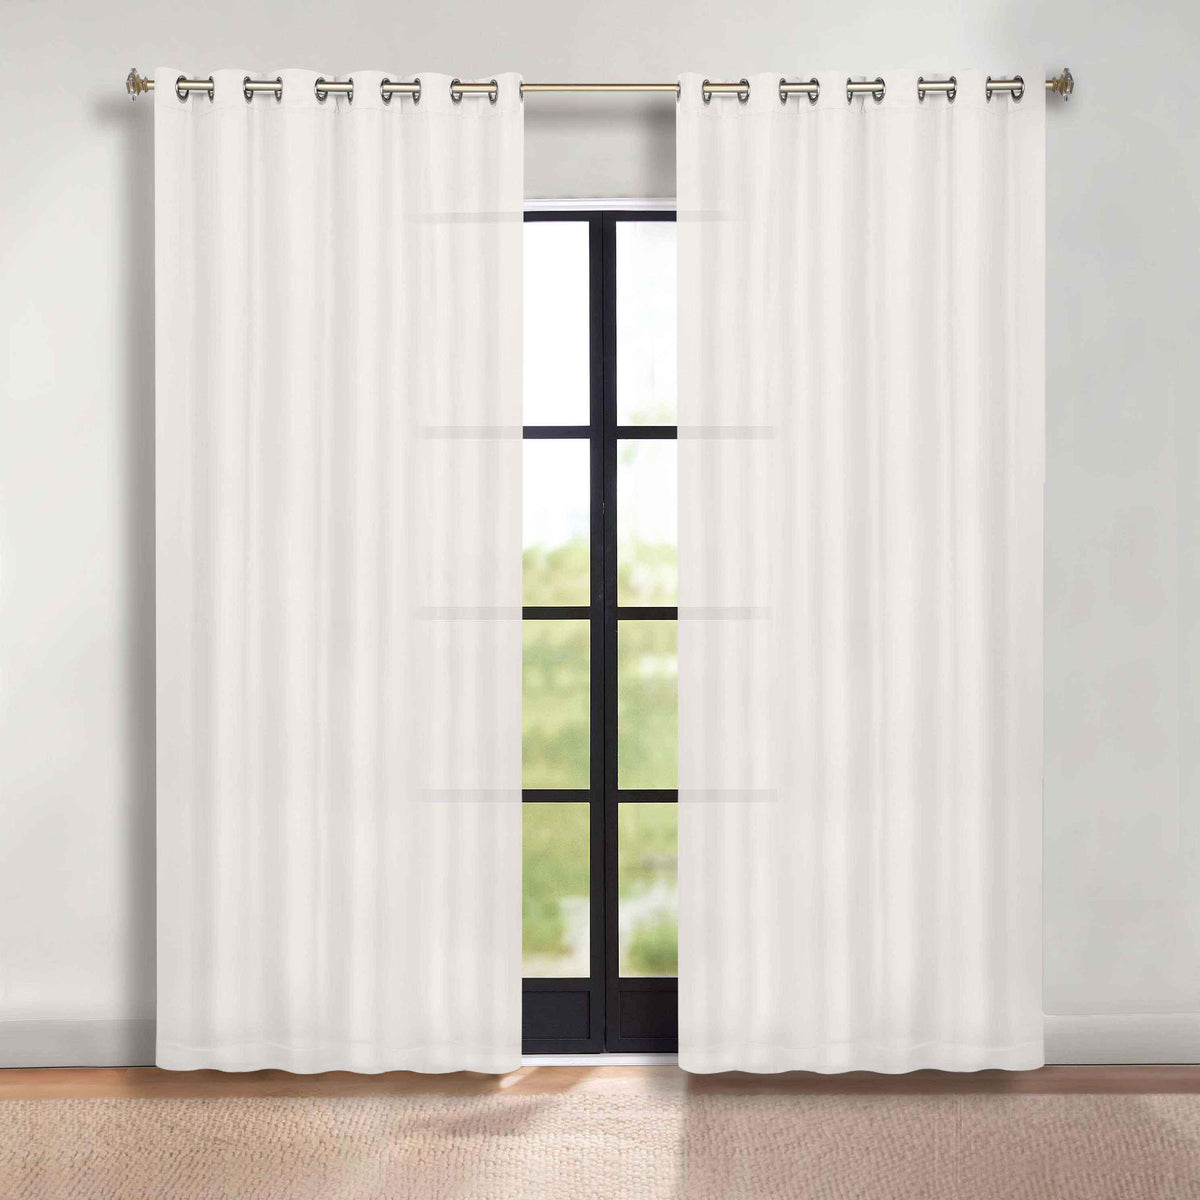 Solid Room Darkening Blackout Curtain Panels, Grommets, Set of 2 - Blackout Curtains by Superior - Superior 